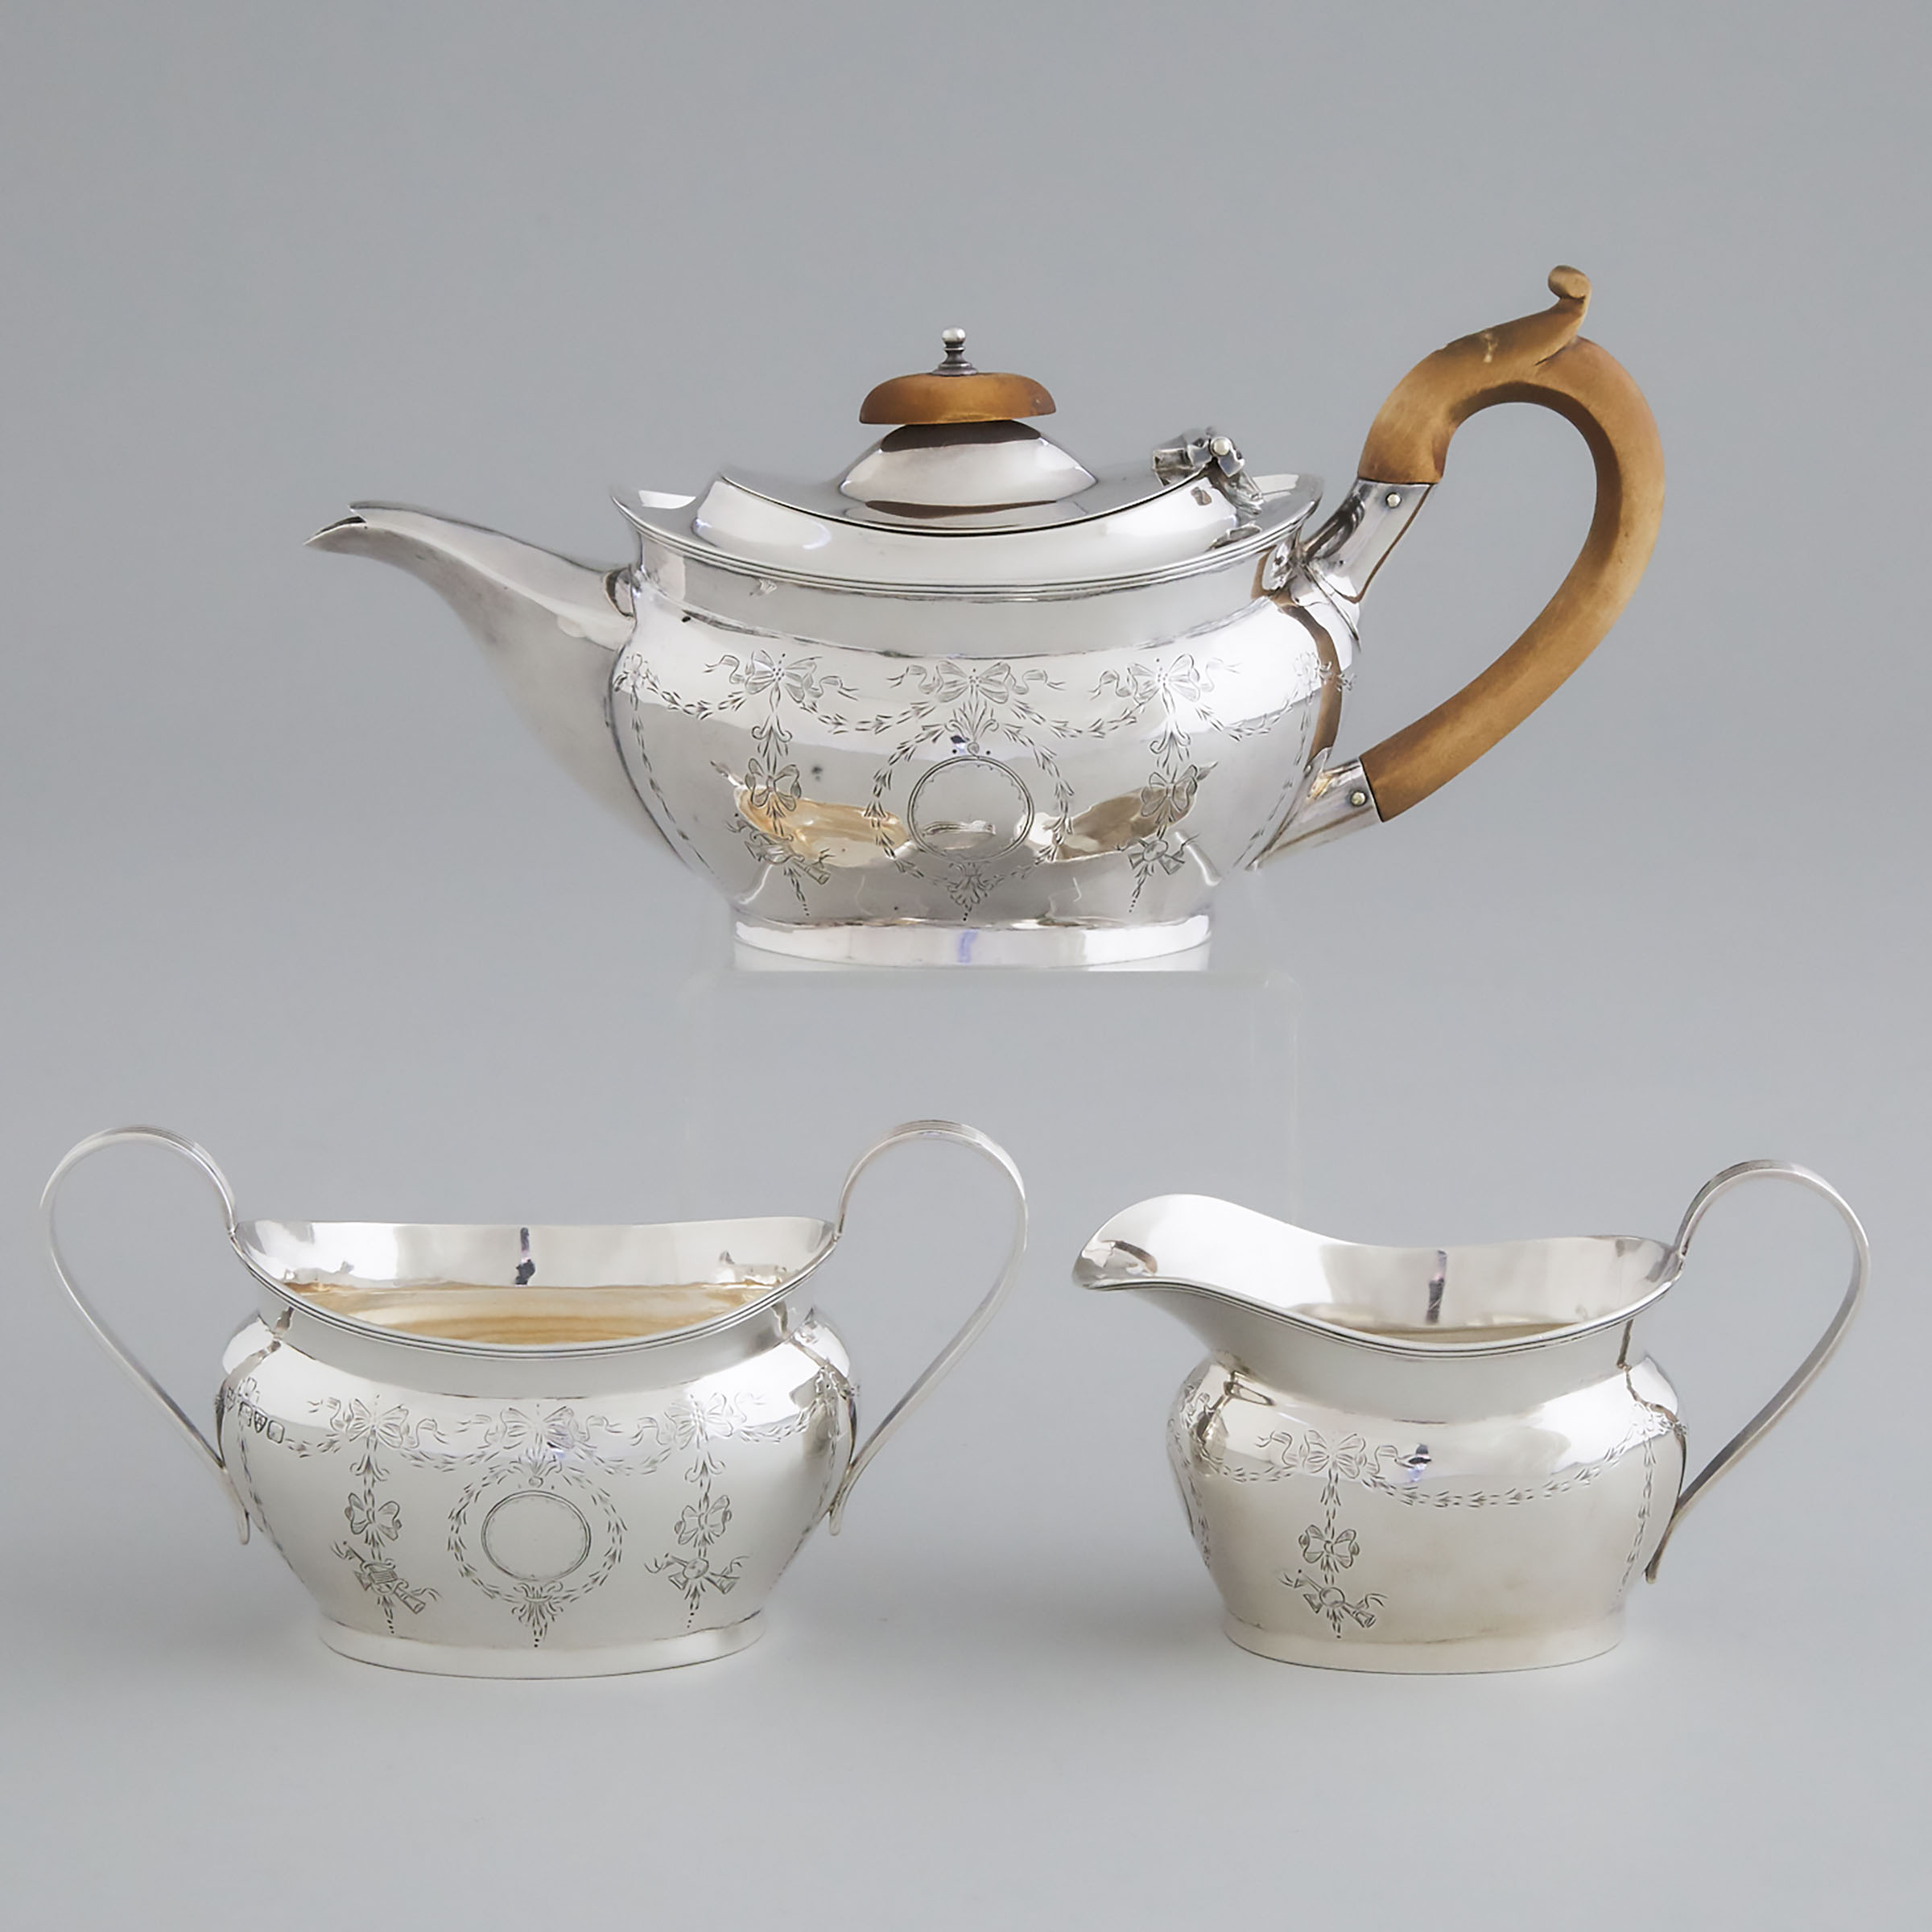 English Silver Bachelor's Tea Service, for Gustavus Seifert & Sons, Quebec City,  George Nathan & Ridley Hayes, Birmingham, 1911 and Chester, 1913